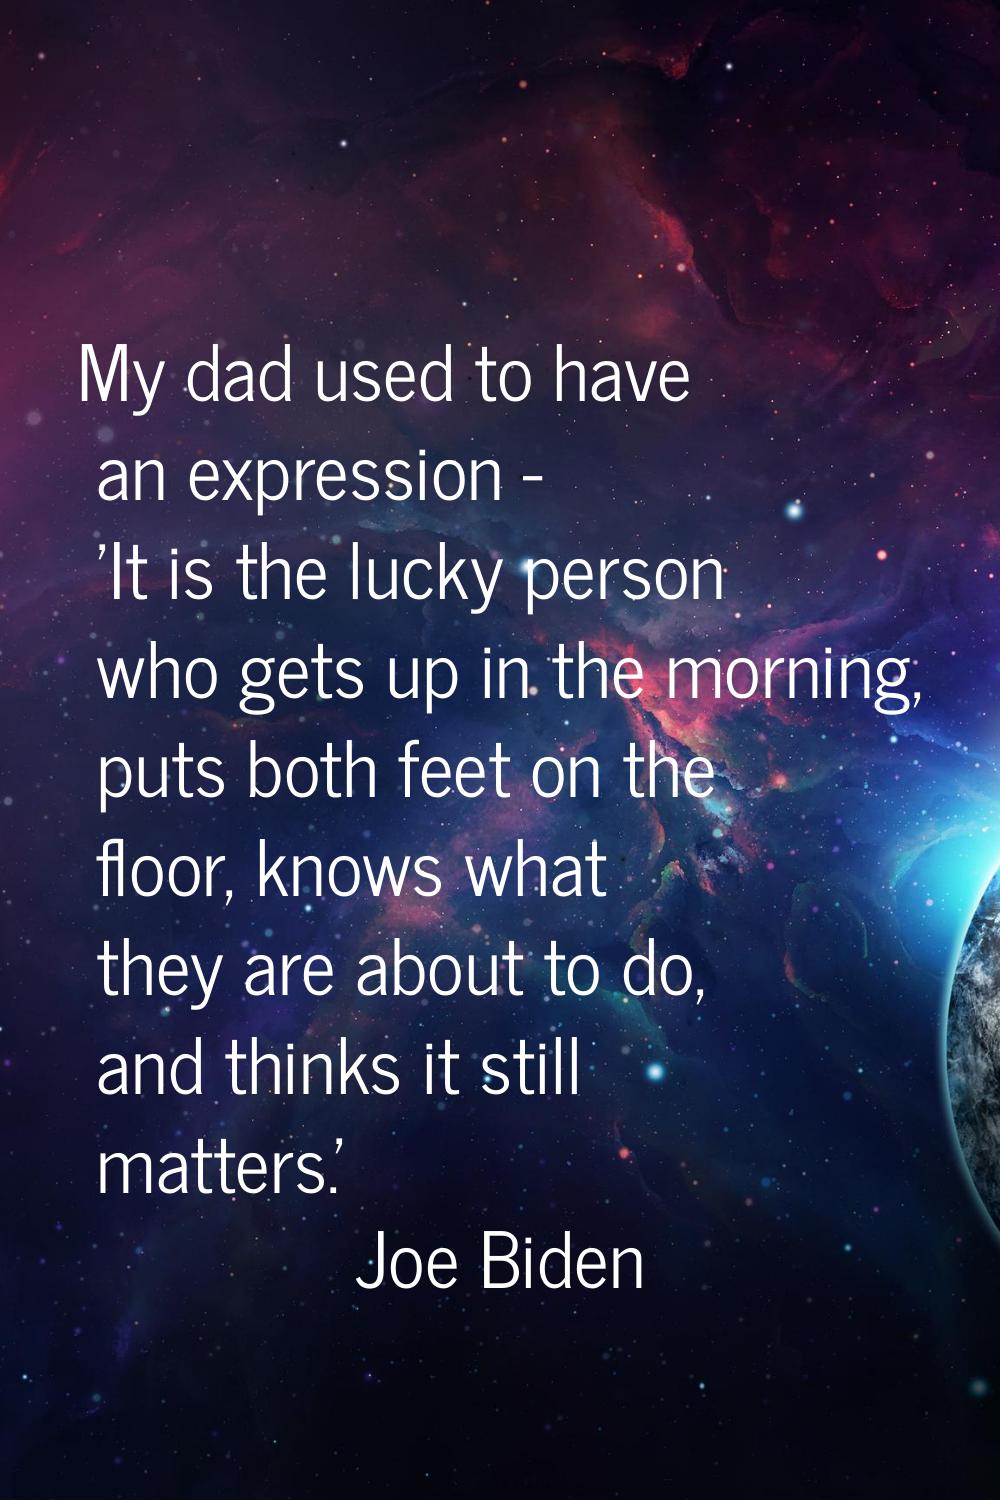 My dad used to have an expression - 'It is the lucky person who gets up in the morning, puts both f